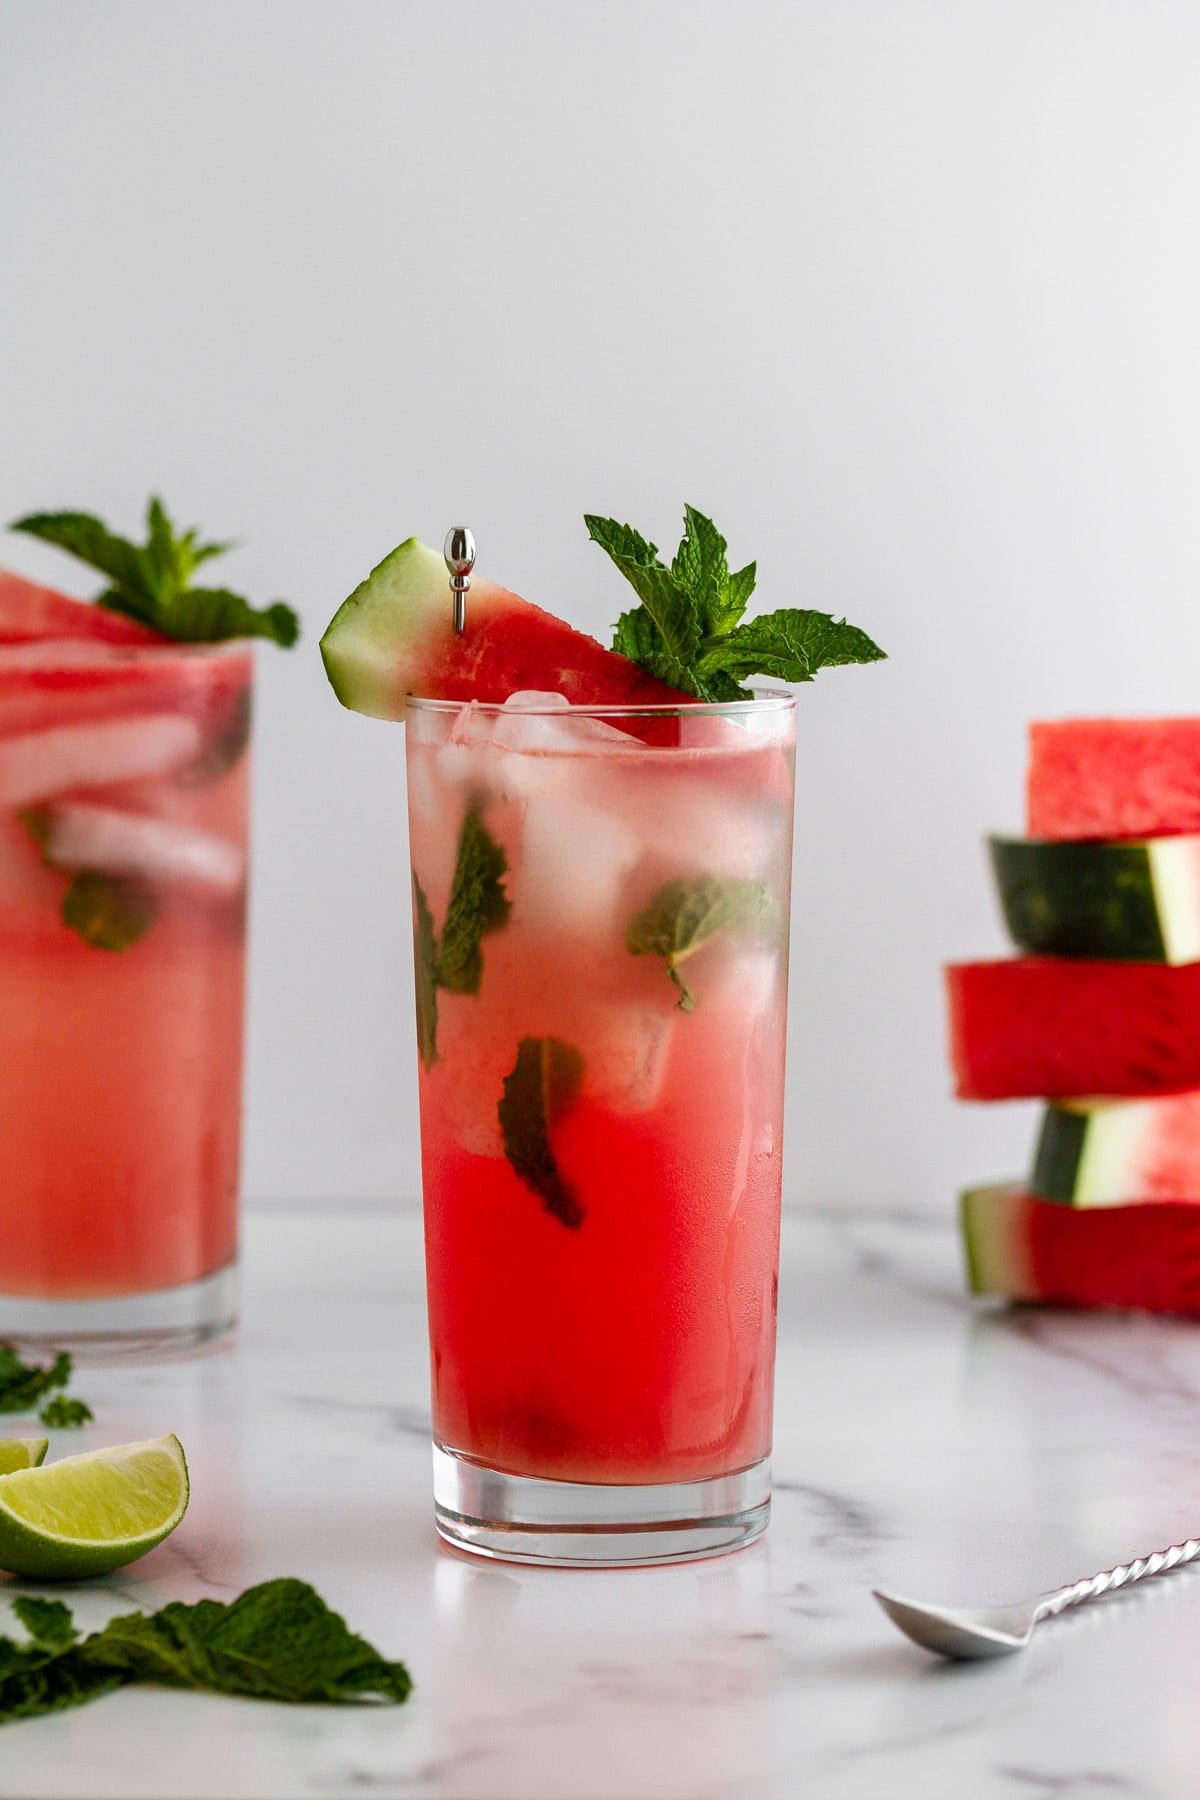 12 Summer Cocktails That Bring the Party Home